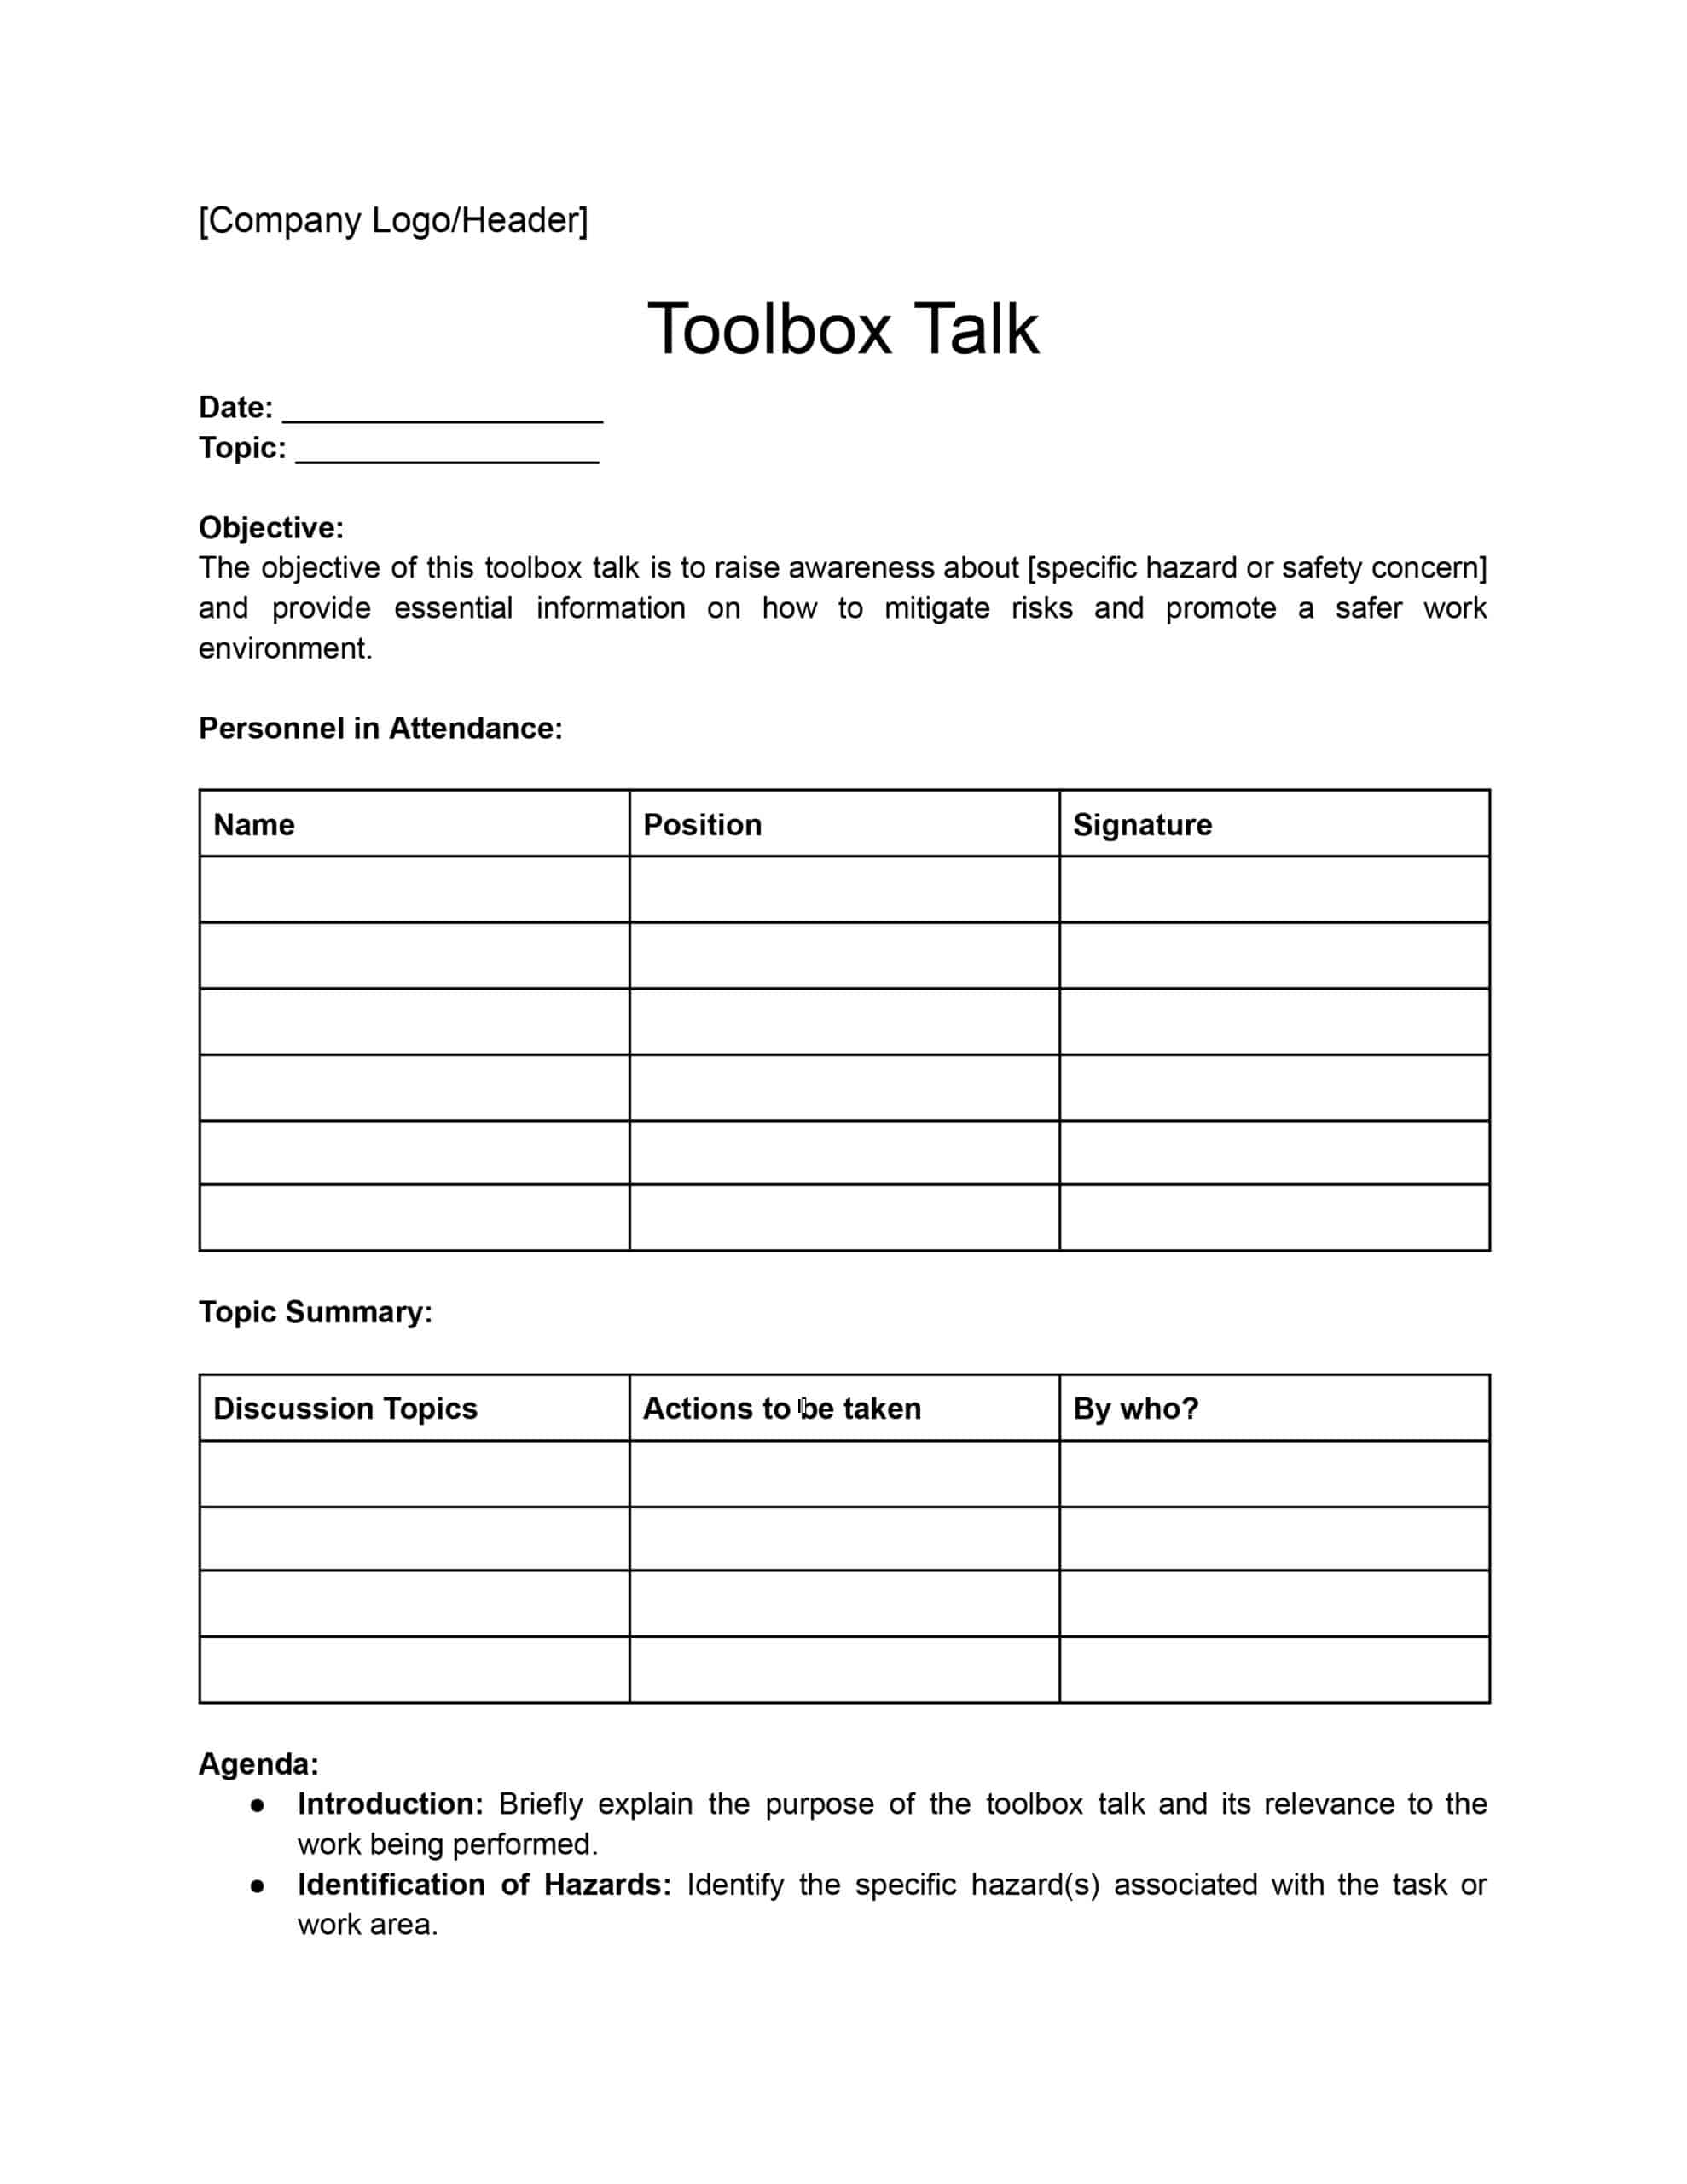 Toolbox Talk Templates: Download Print for Free